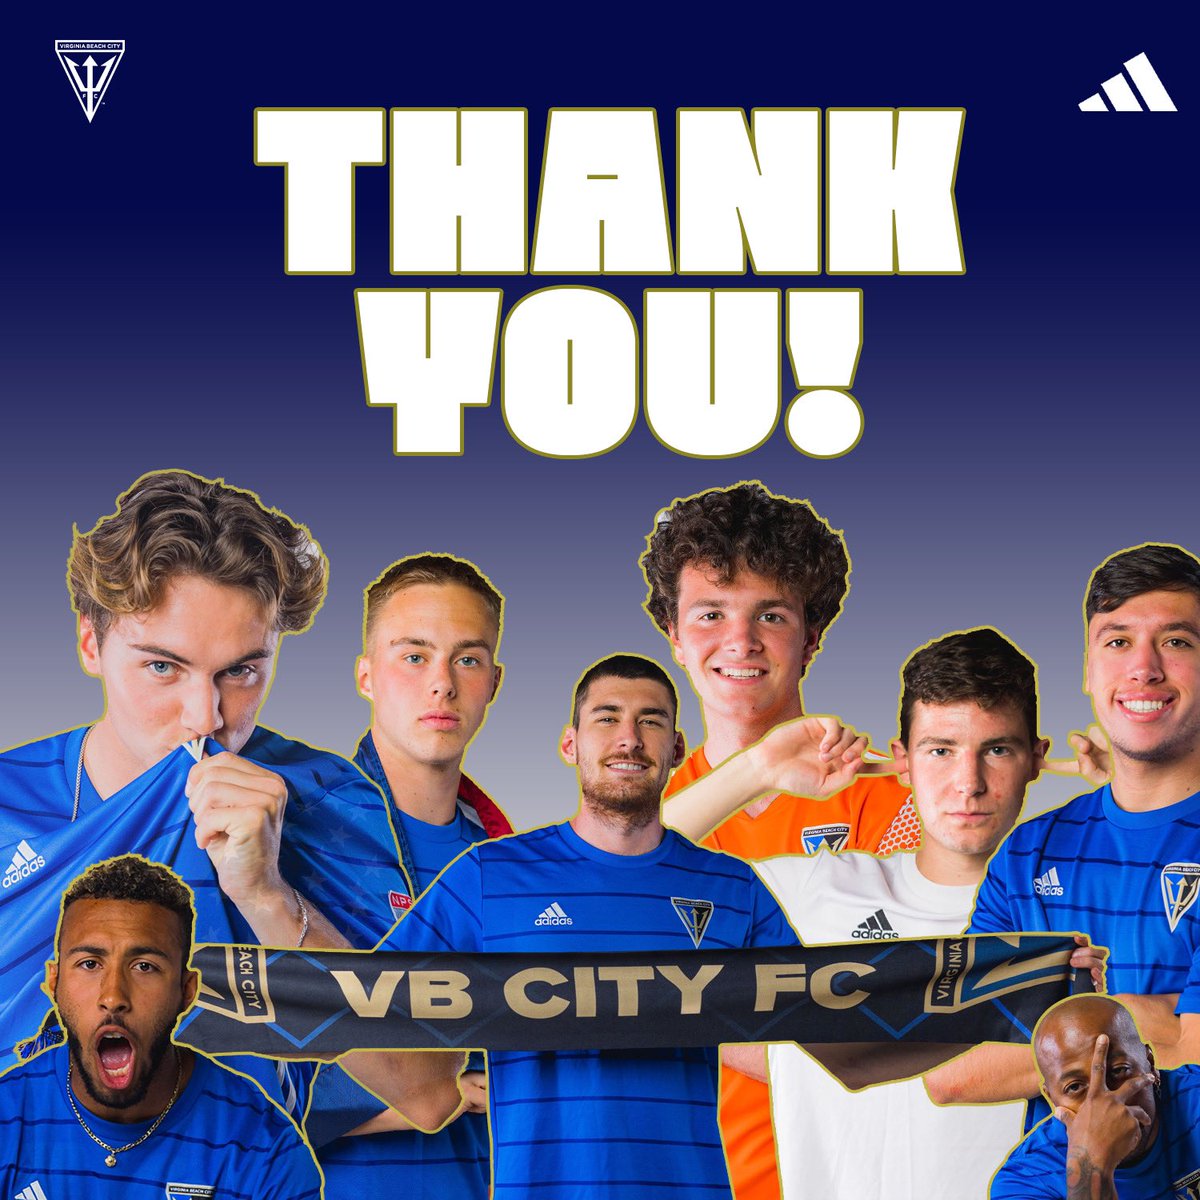 Fans, thank you! 💙

You saw us at our highs and lows, being there for us every step of the way. 

We will see you next year!

Thank you for being… #4theCity🔱 !